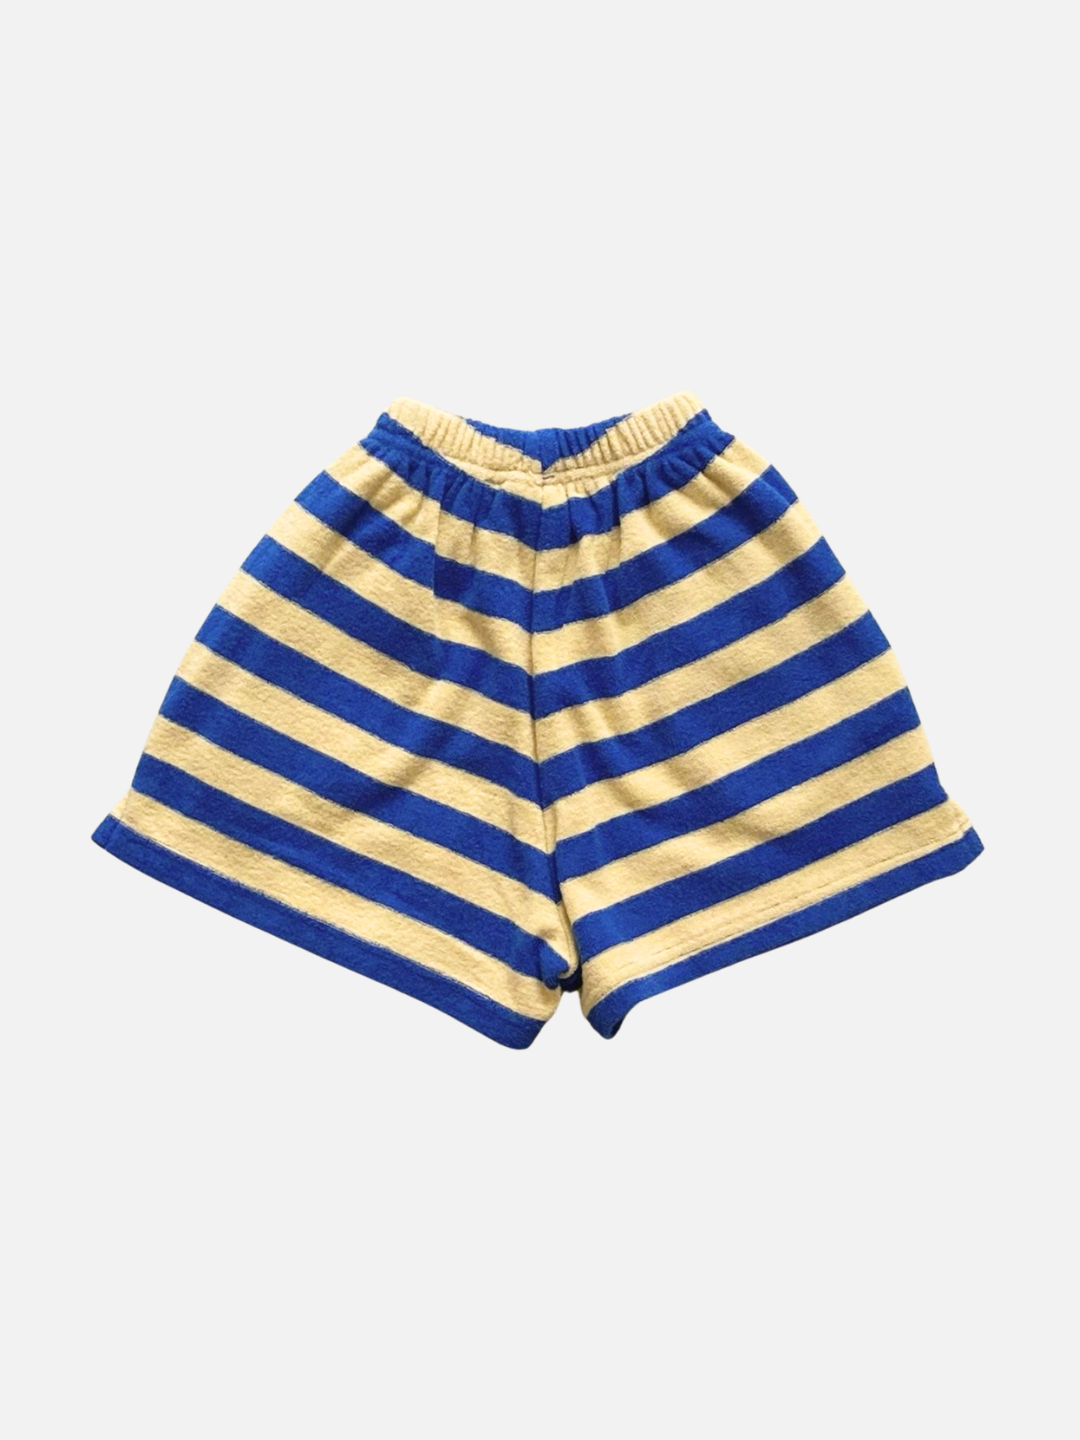 A back view of the kid's Riviera Shorts in blue/yellow